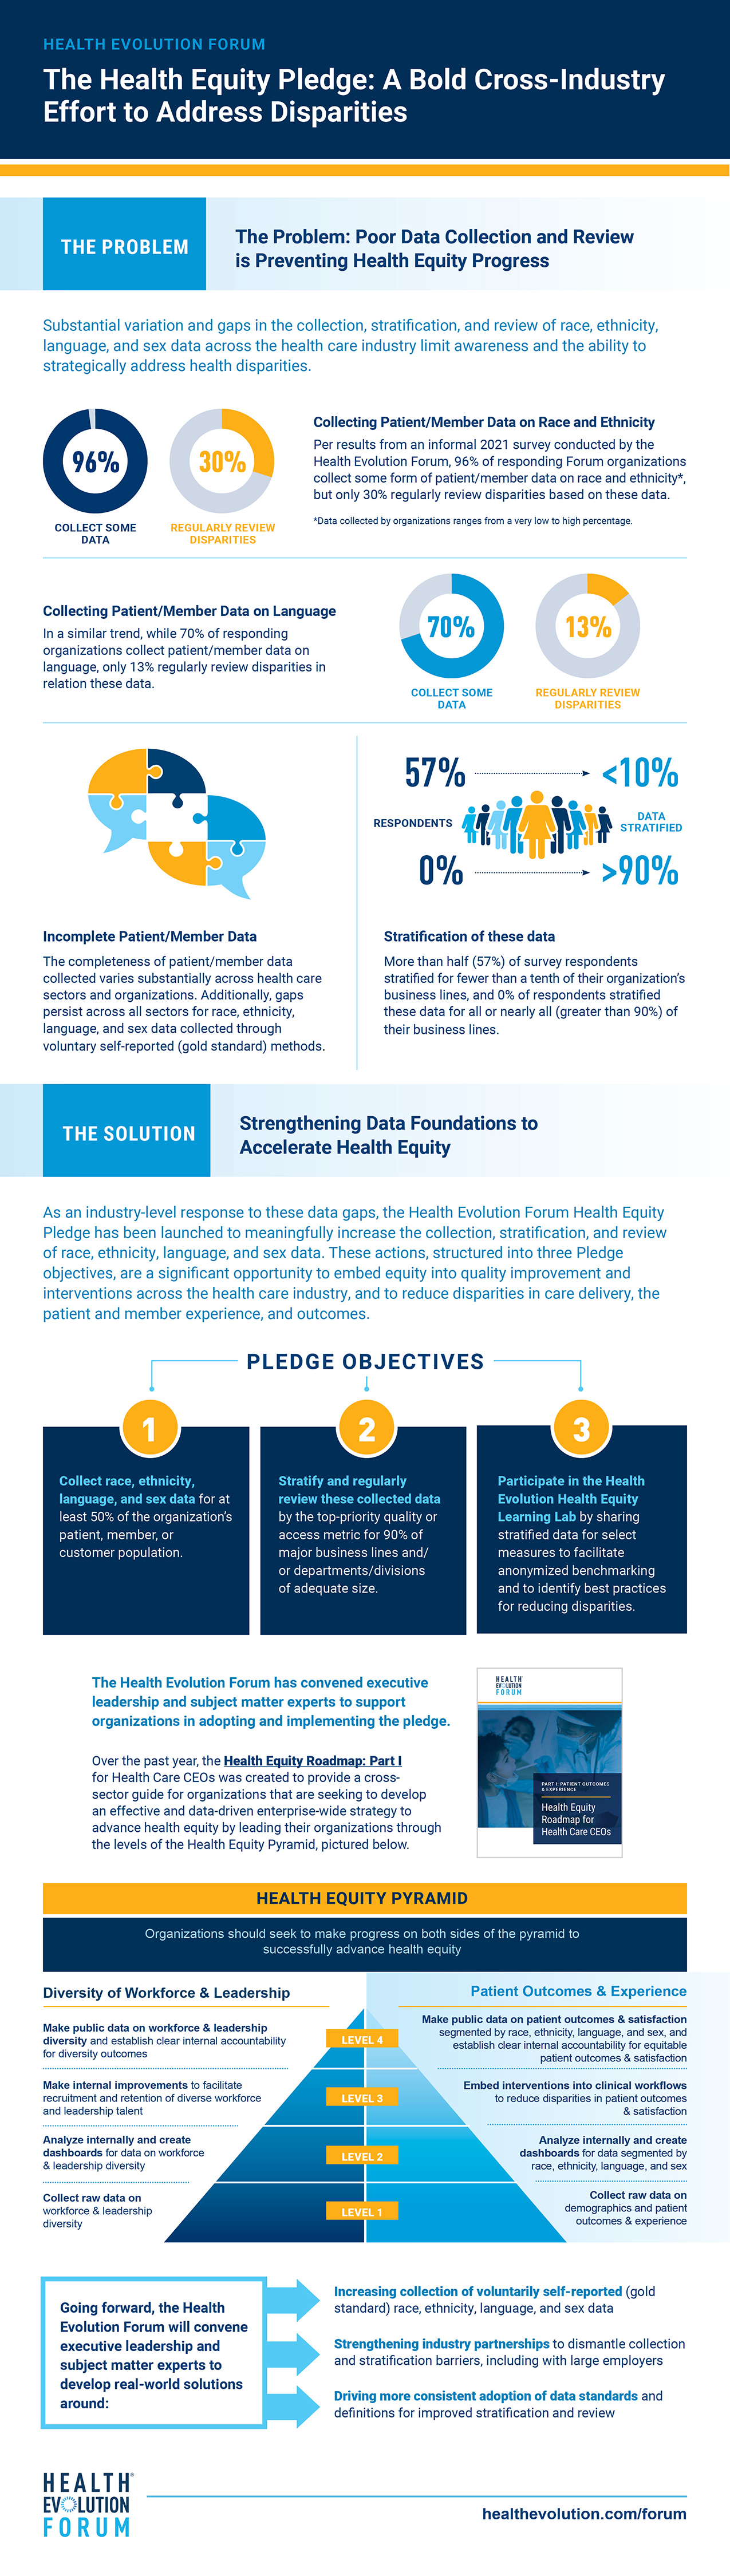 Infographic about Health Equity Pledge and the role of data and quality at the intersection of health equity.